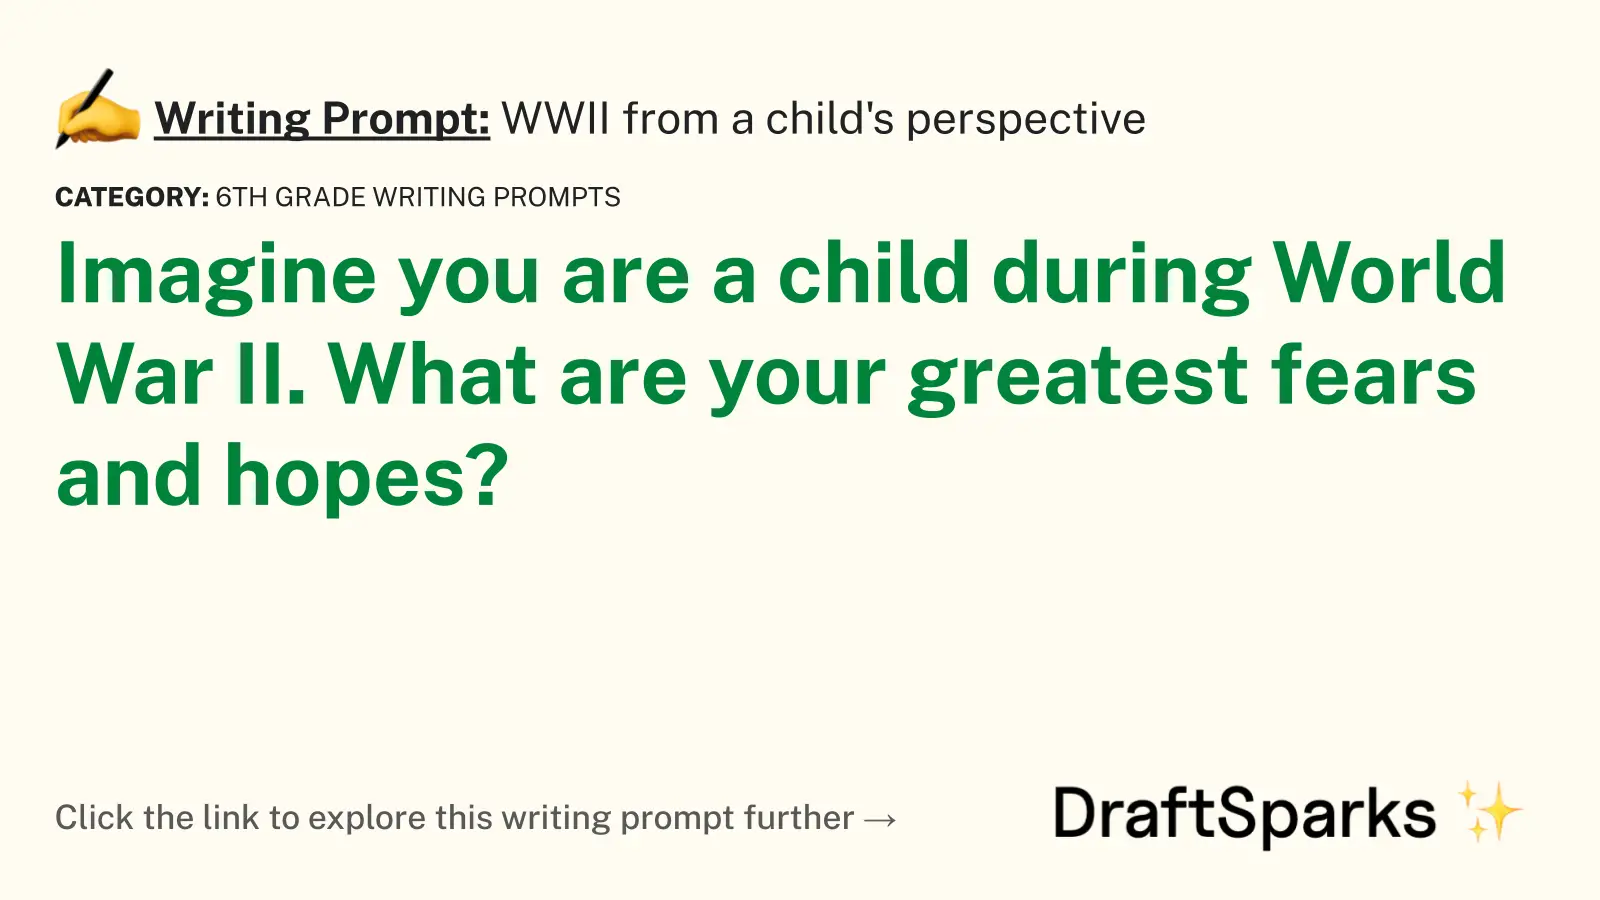 WWII from a child’s perspective